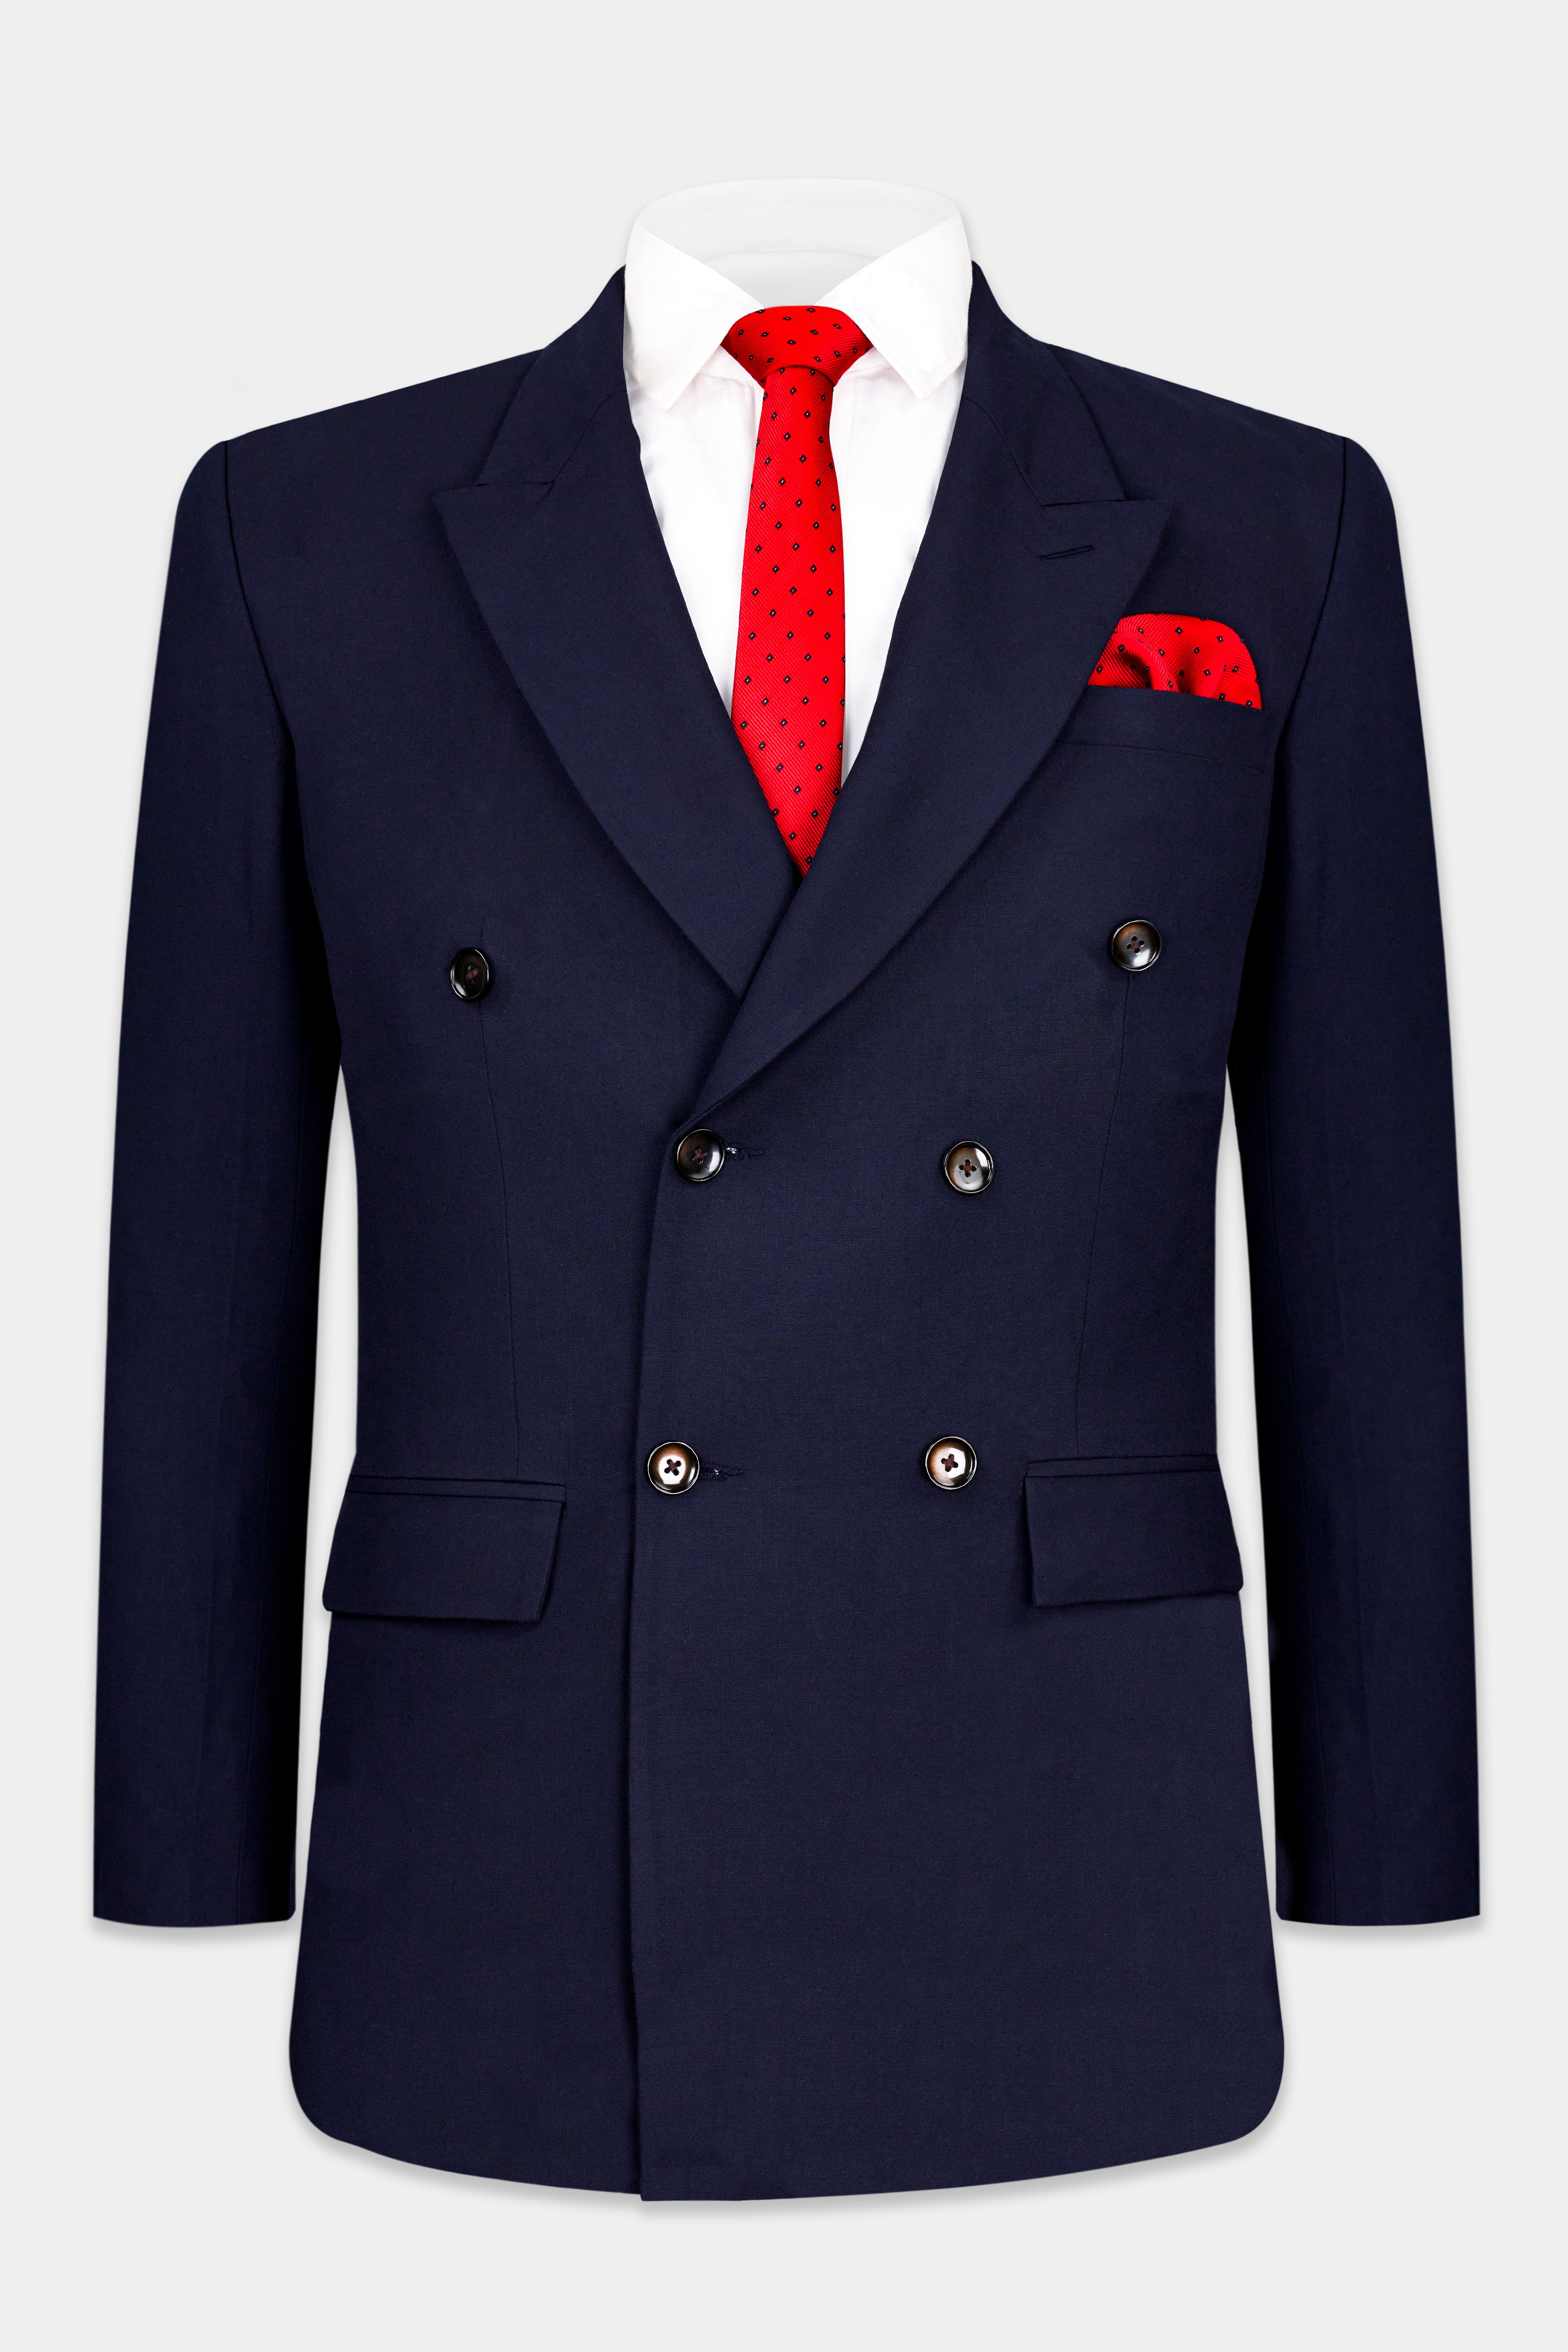 Bleached Cedar Blue Stretchable Wool rich Double Breasted traveler Suit ST2758-DB-36, ST2758-DB-38, ST2758-DB-40, ST2758-DB-42, ST2758-DB-44, ST2758-DB-46, ST2758-DB-48, ST2758-DB-50, ST2758-DB-52, ST2758-DB-54, ST2758-DB-56, ST2758-DB-58, ST2758-DB-60